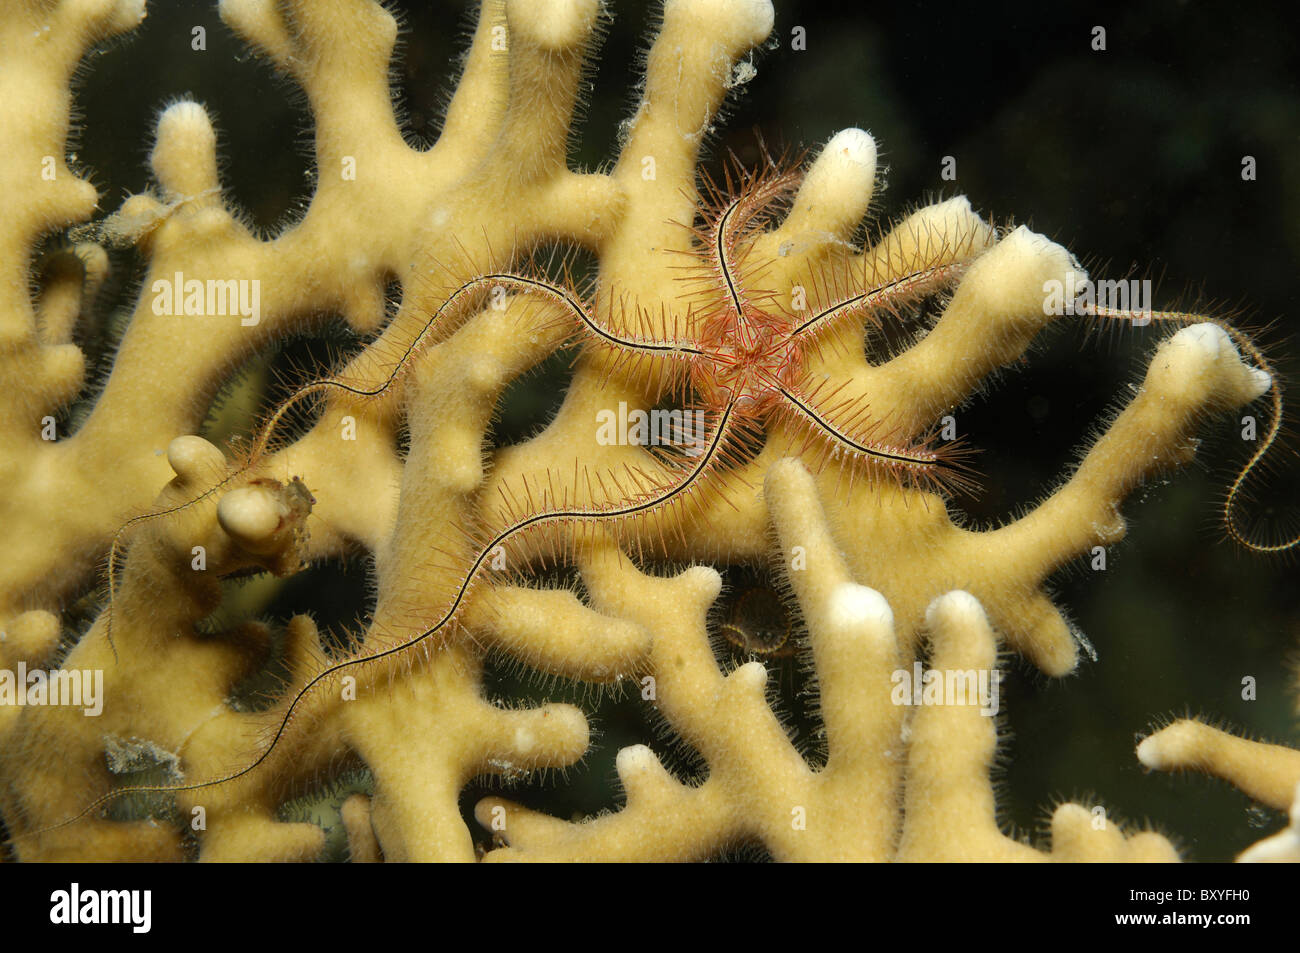 Brittle Star on Fire Coral, Ophiothrix sp., Millepora dichotoma, Marsa Alam, Red Sea, Egypt Stock Photo